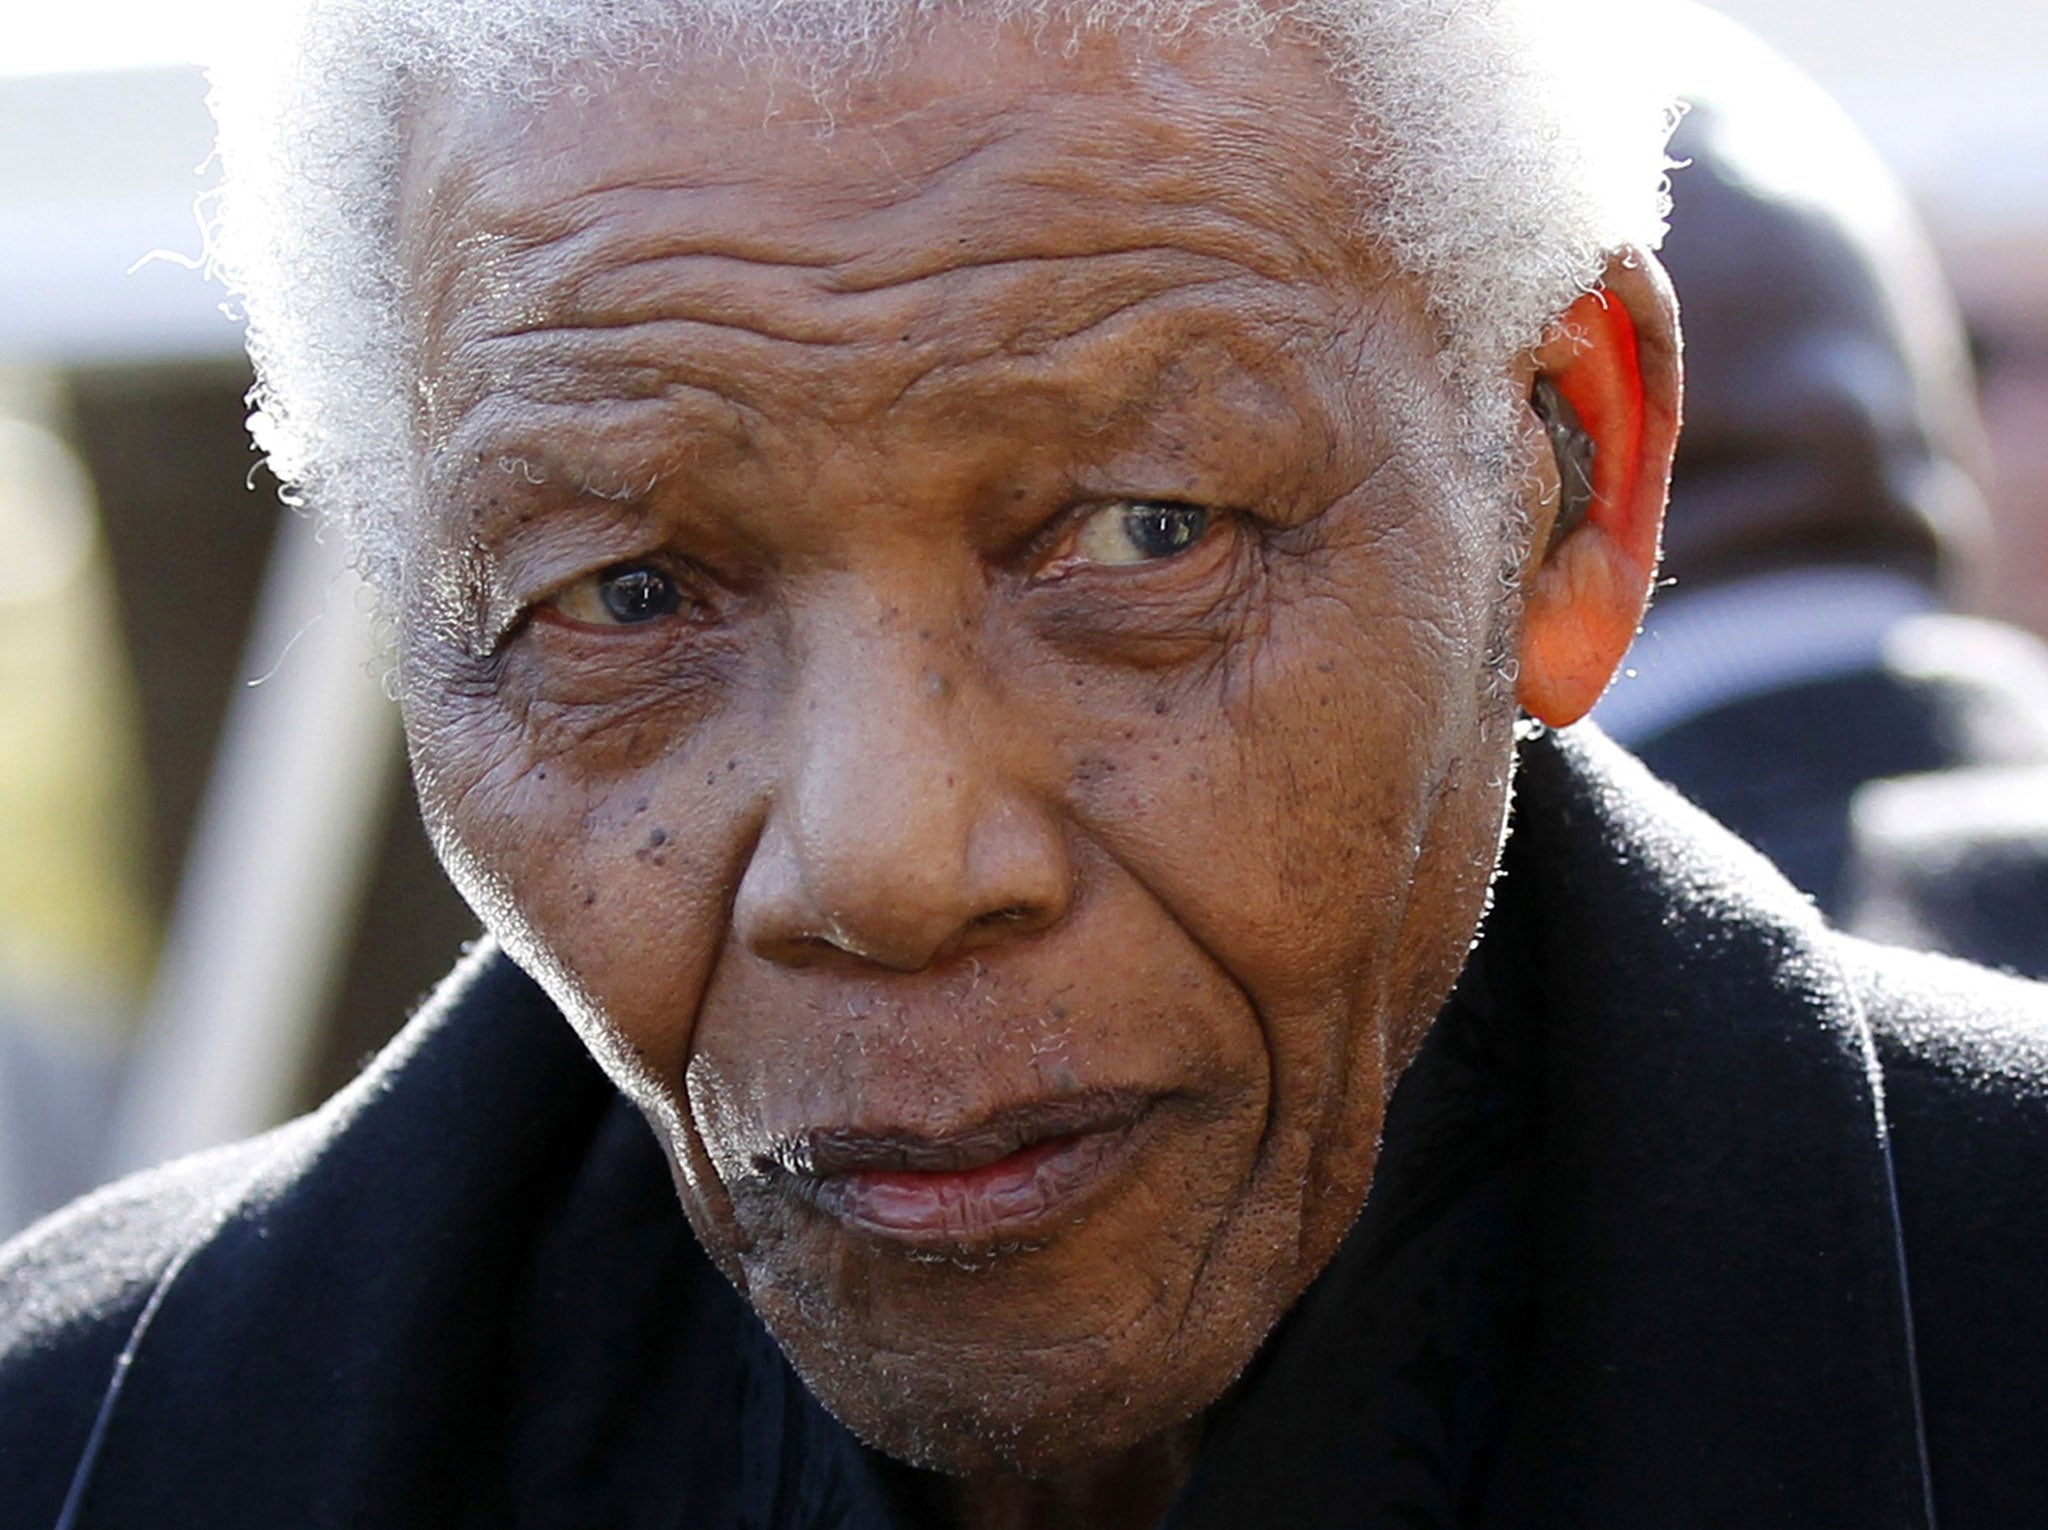 Nelson Mandela remains in critical but stable condition in hospital